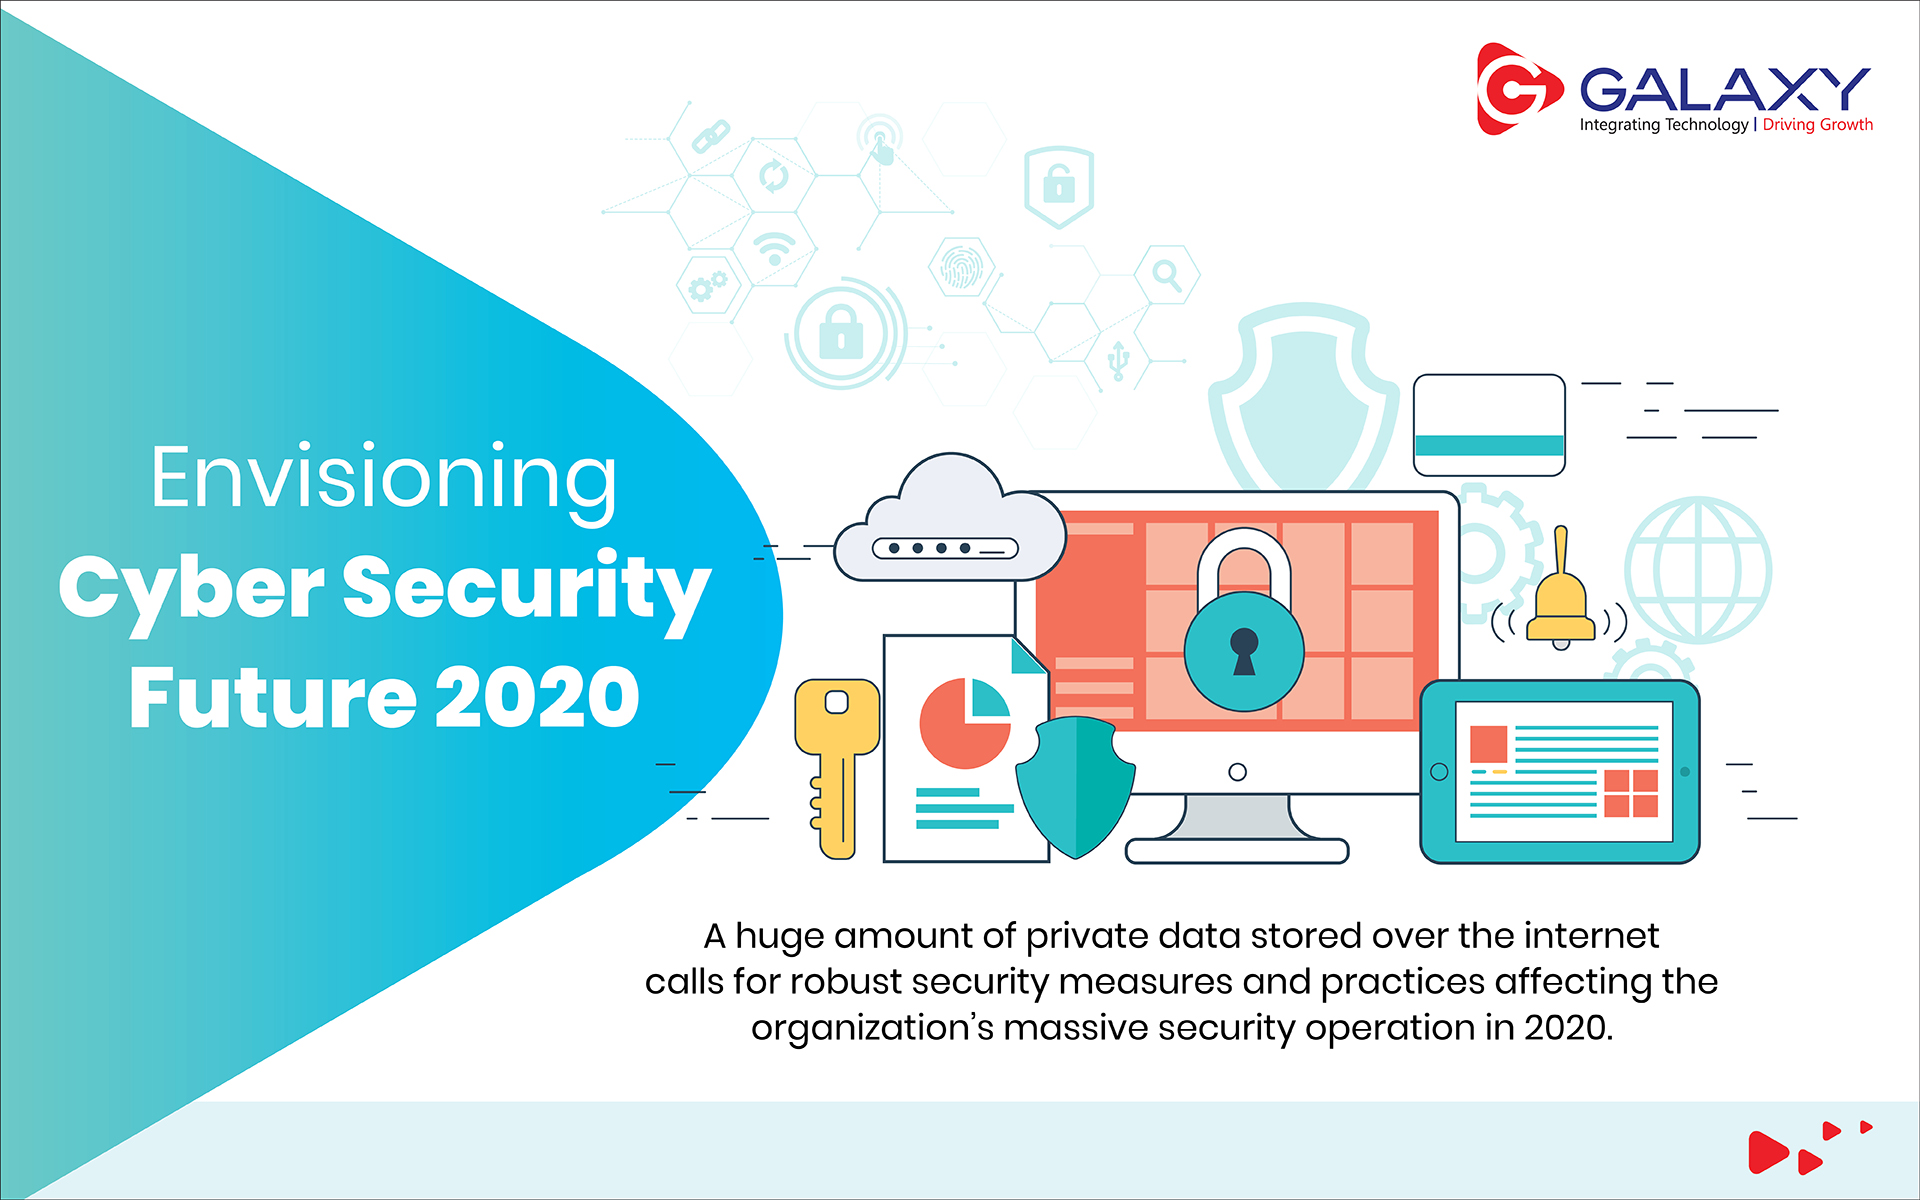 Envisioning Cyber Security Future – 2020